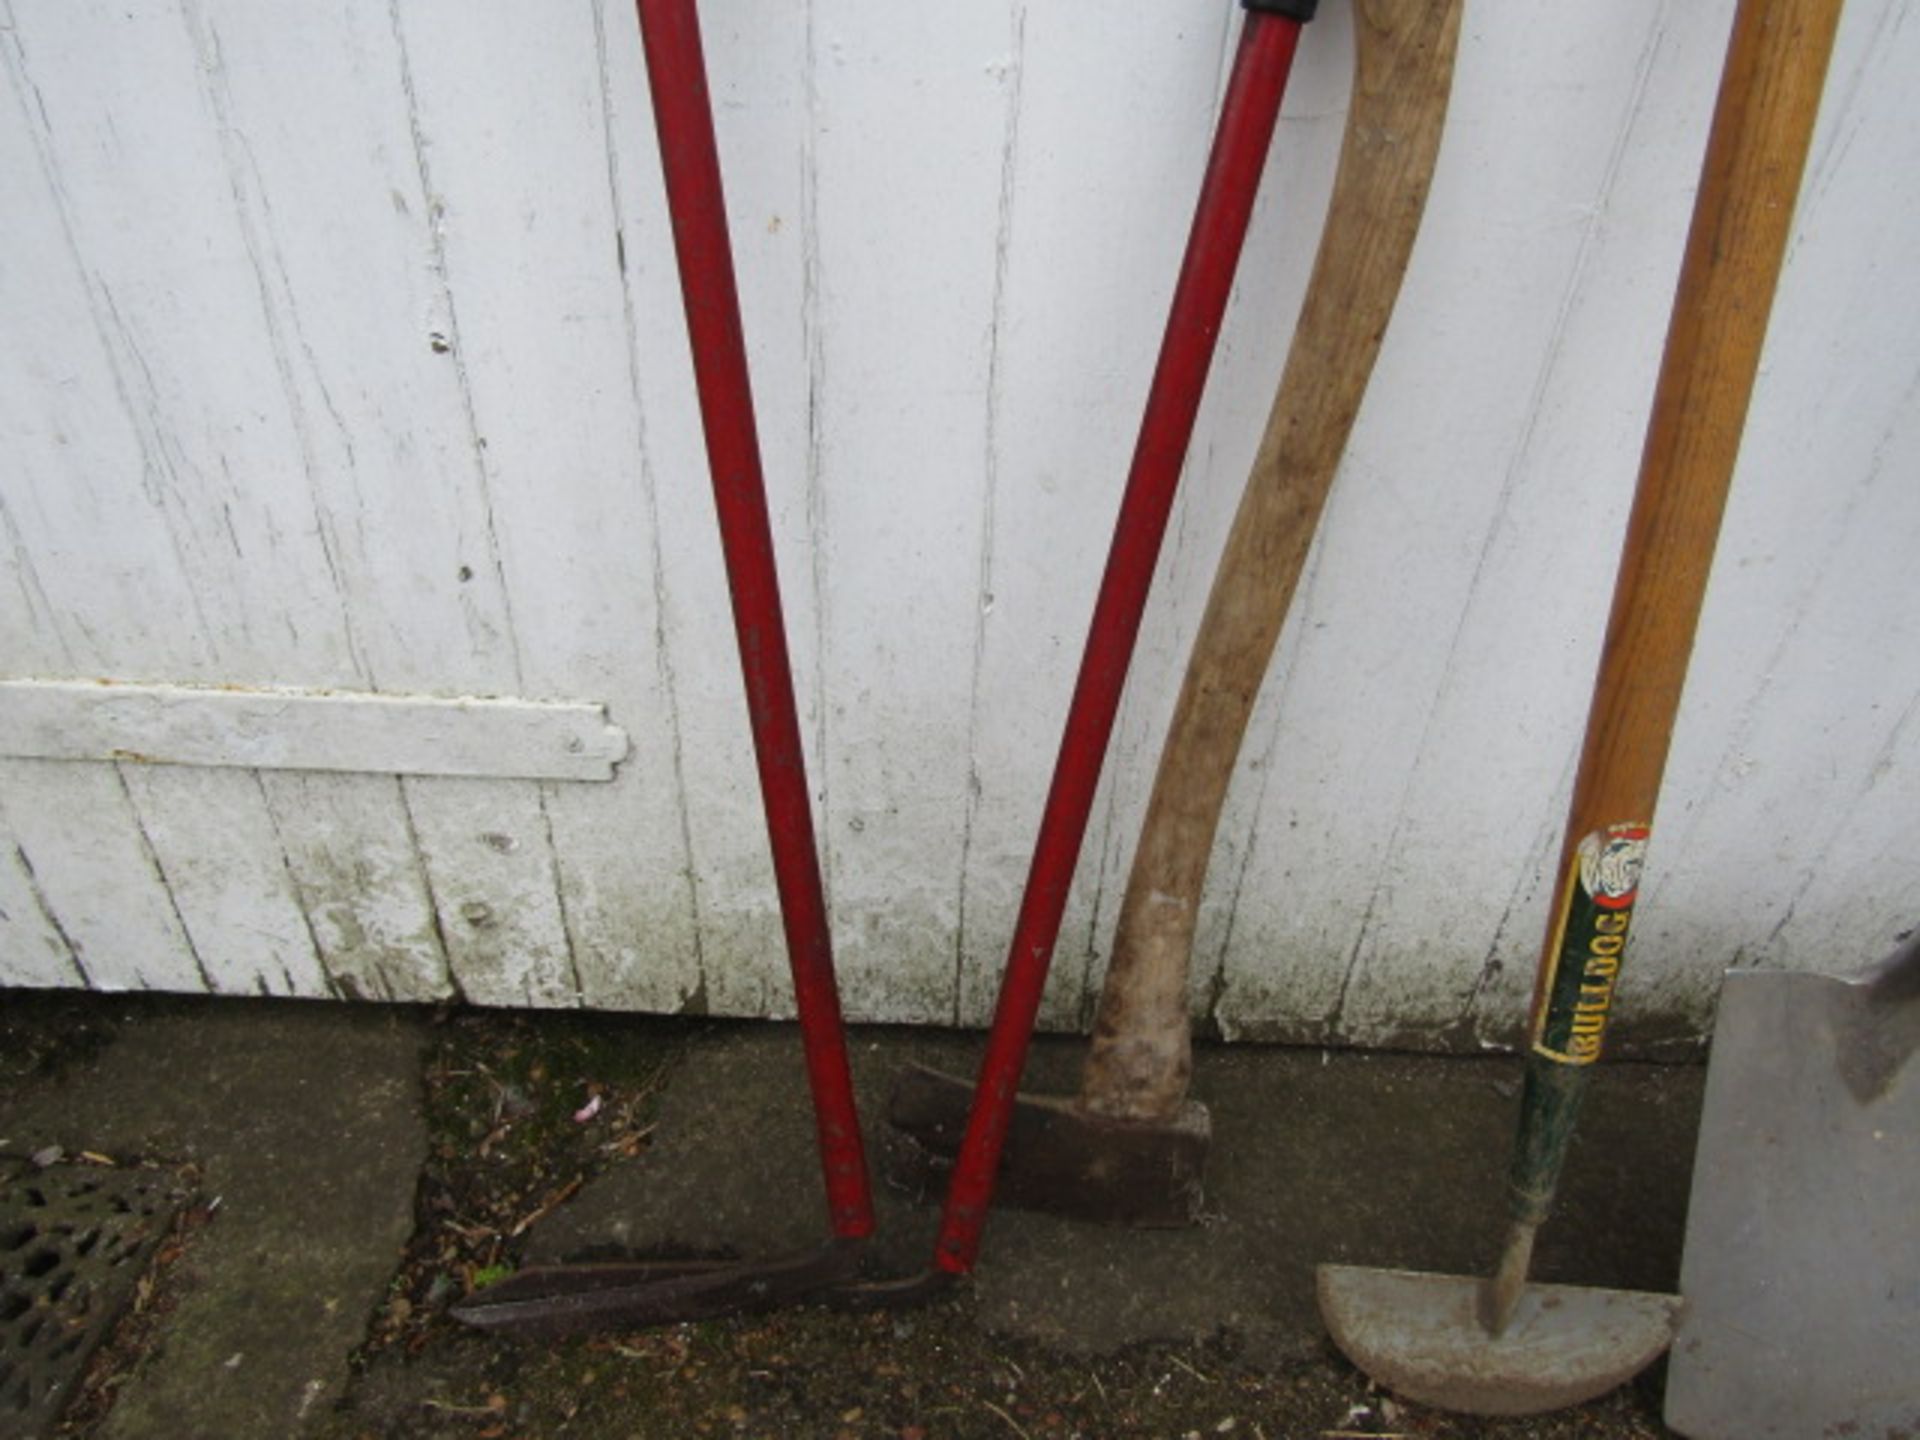 Garden tools and axe - Image 5 of 6